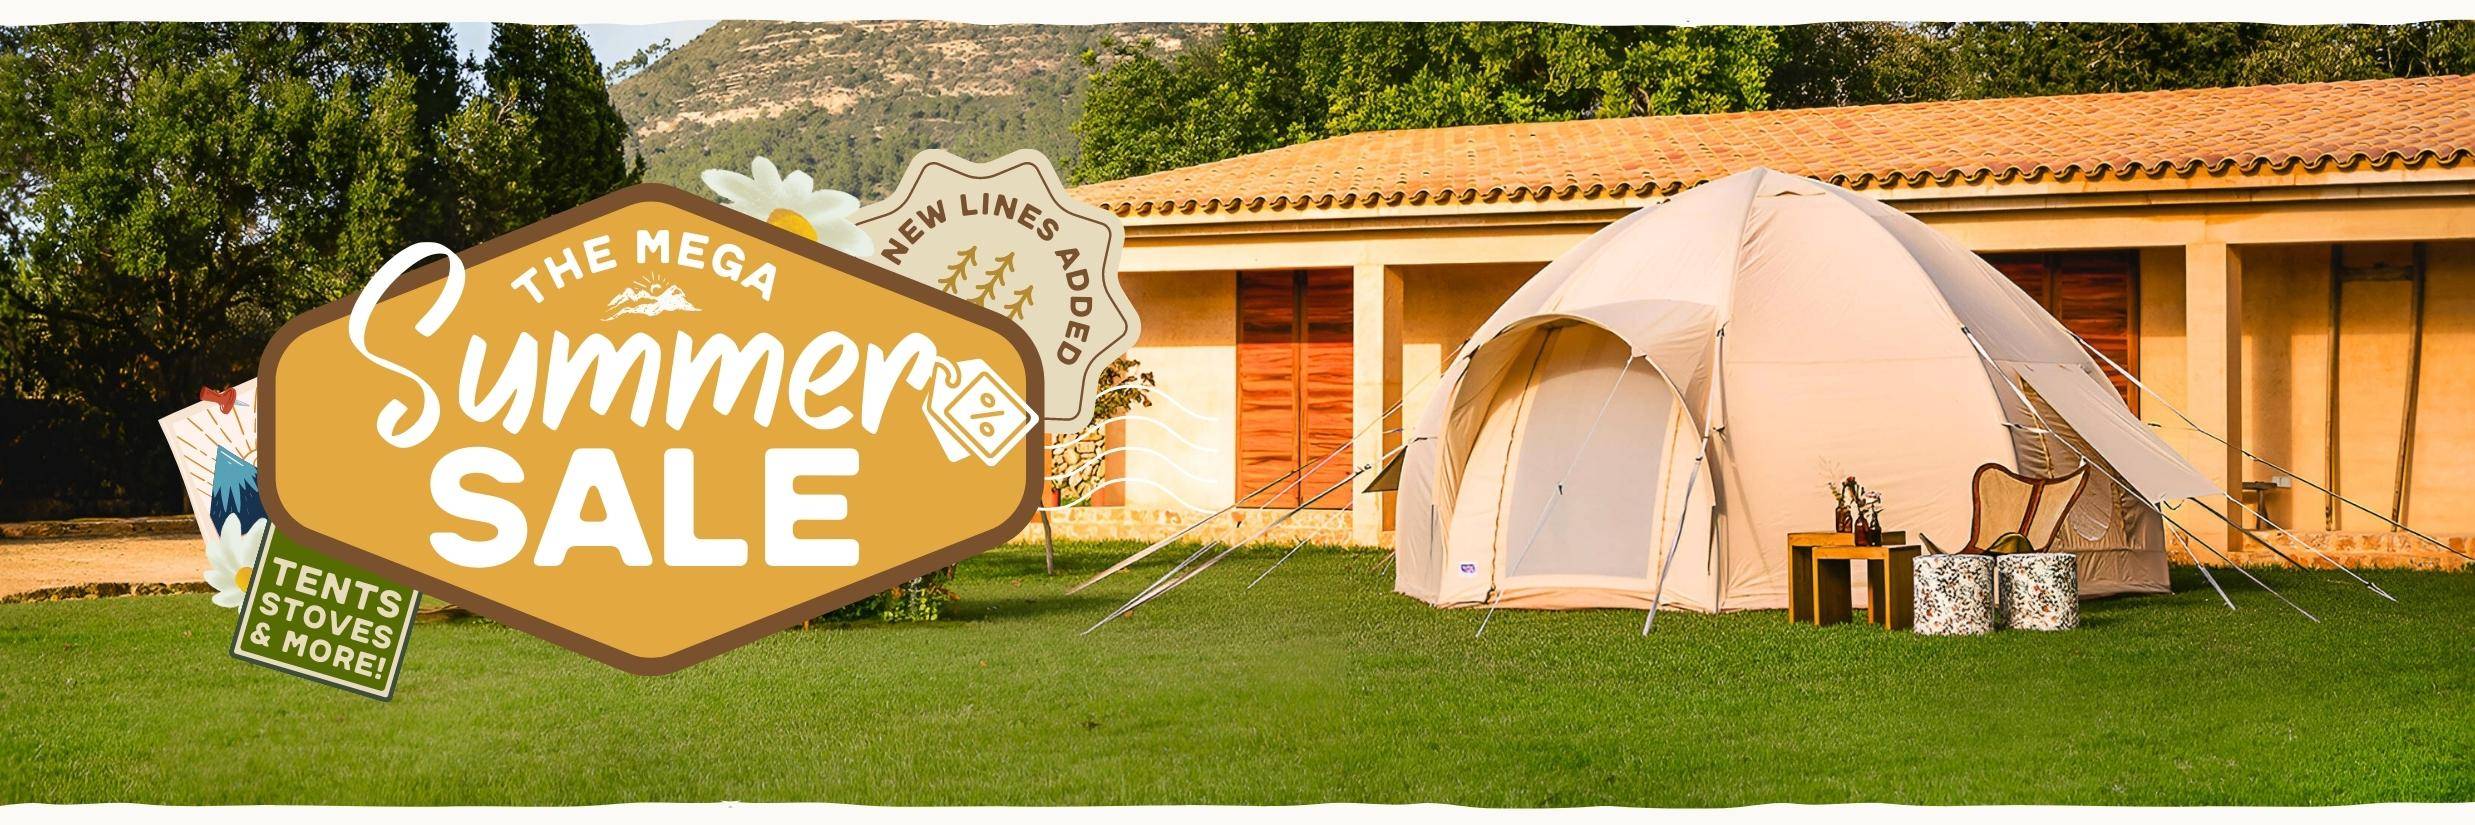 Nova Air Dome Tent With Summer Sale Badge